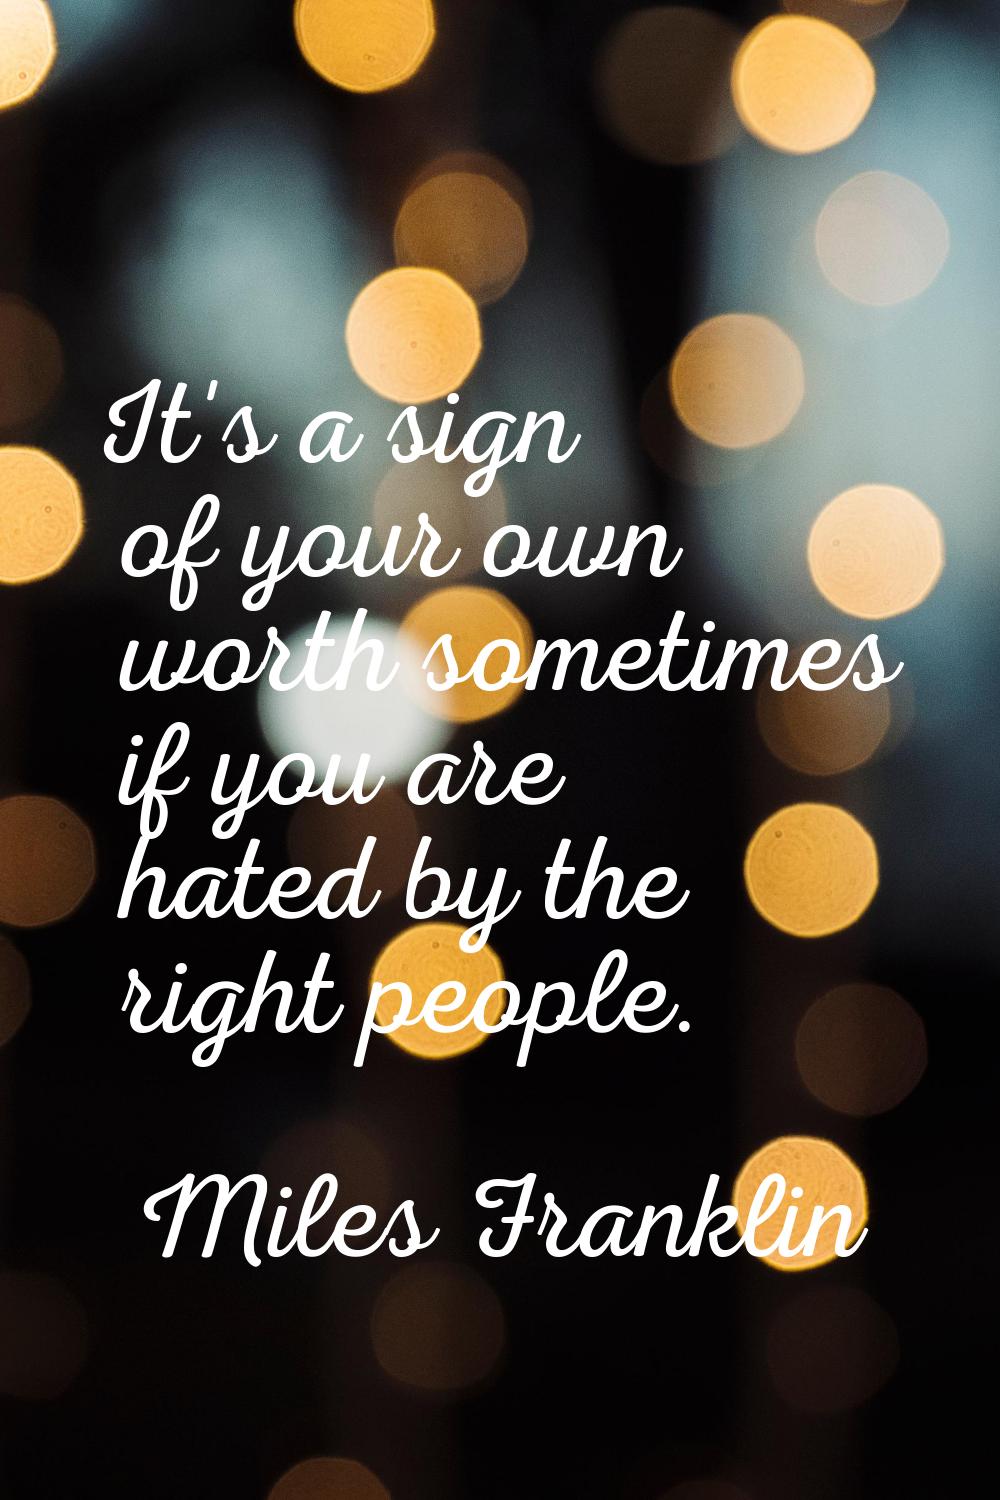 It's a sign of your own worth sometimes if you are hated by the right people.